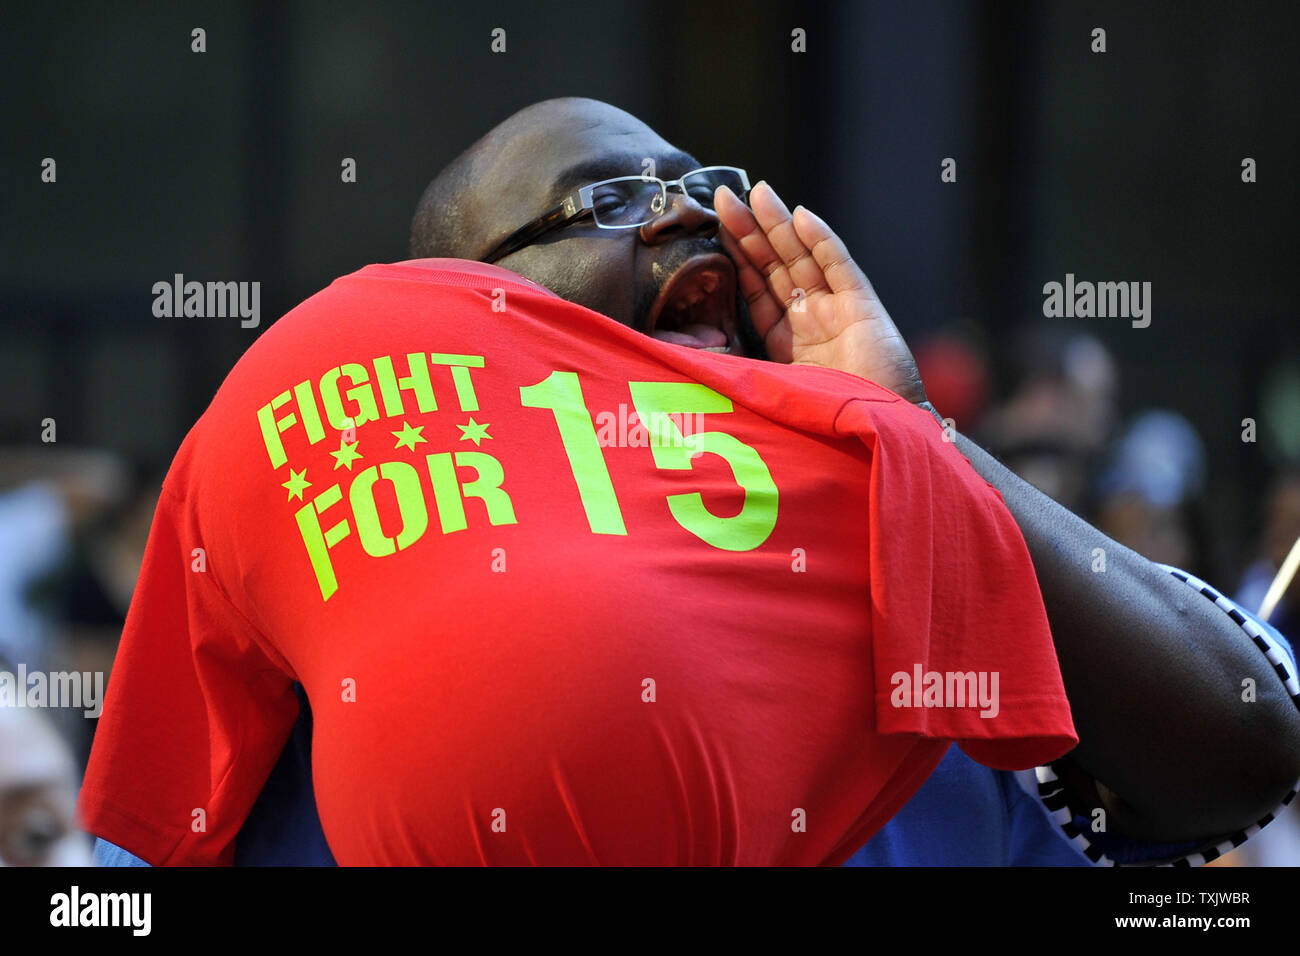 Elmer Head yells at a rally in support of striking fast food workers, who walked off the job in nearly 60 cities, at Federal Plaza in Chicago on August 29, 2013.  Strikers are calling for an increase in the Federal minimum wage from $7.25 to $15 per hour.     UPI/Brian Kersey Stock Photo